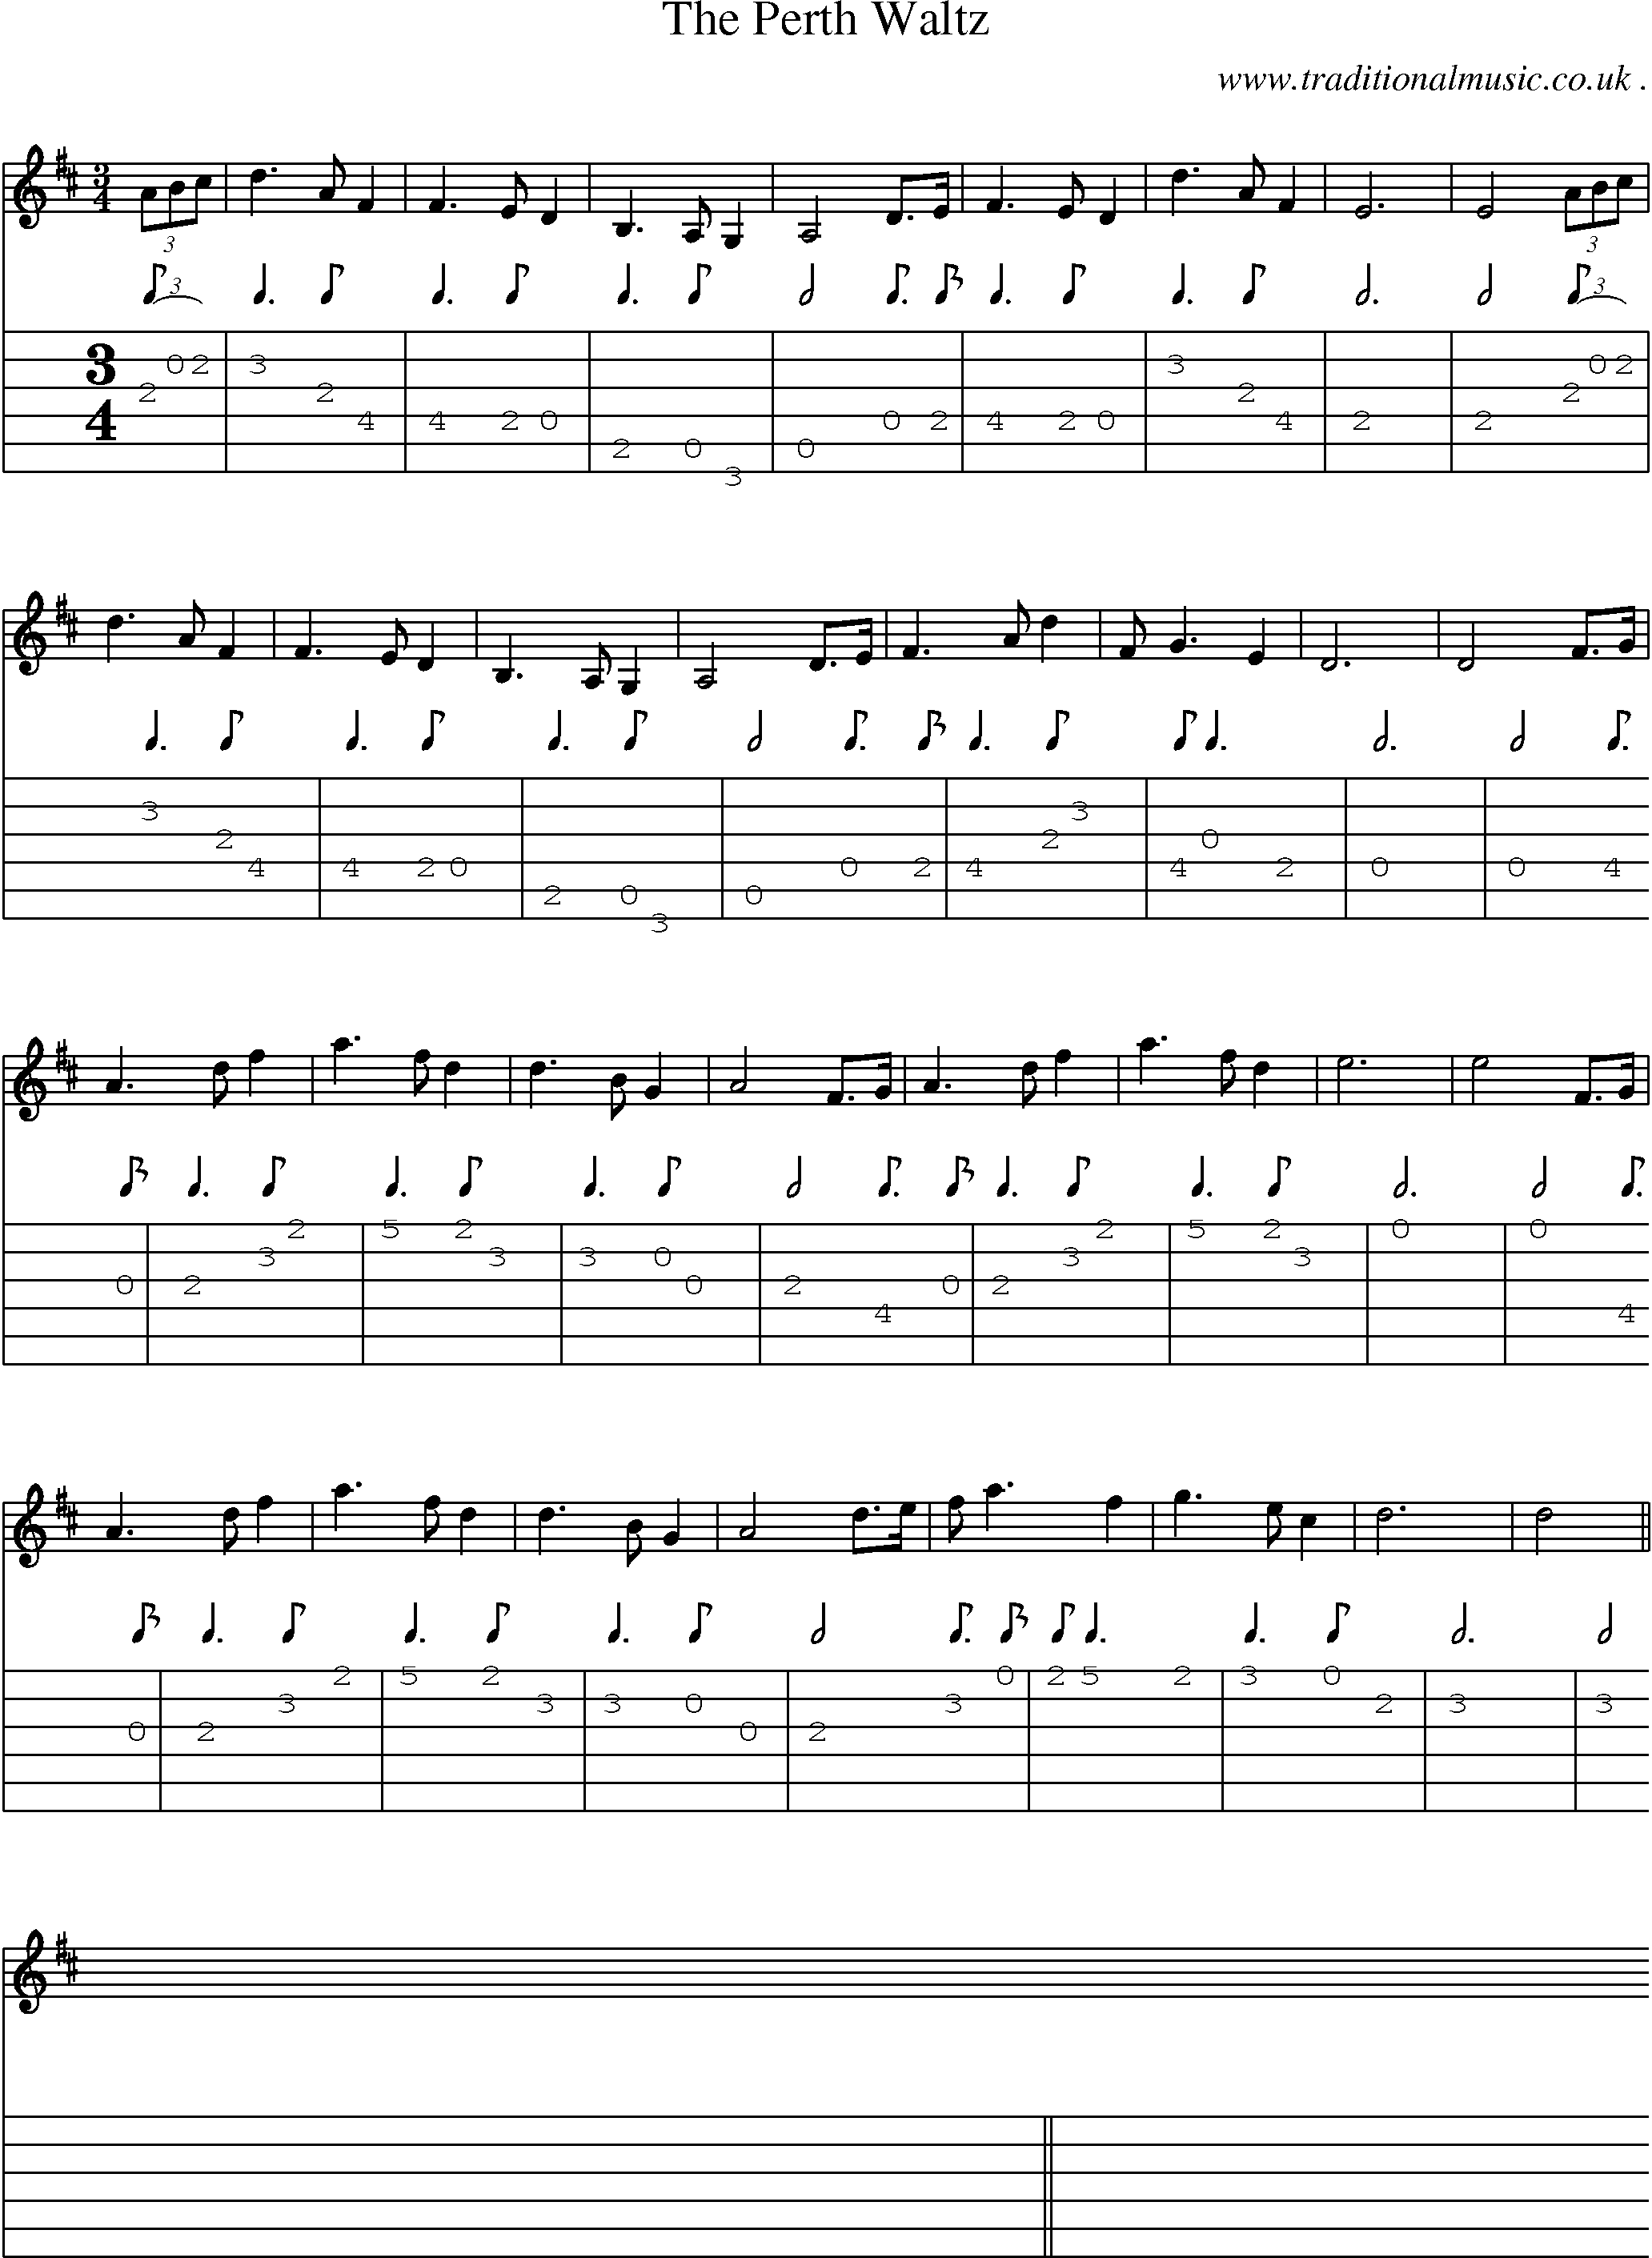 Sheet-music  score, Chords and Guitar Tabs for The Perth Waltz